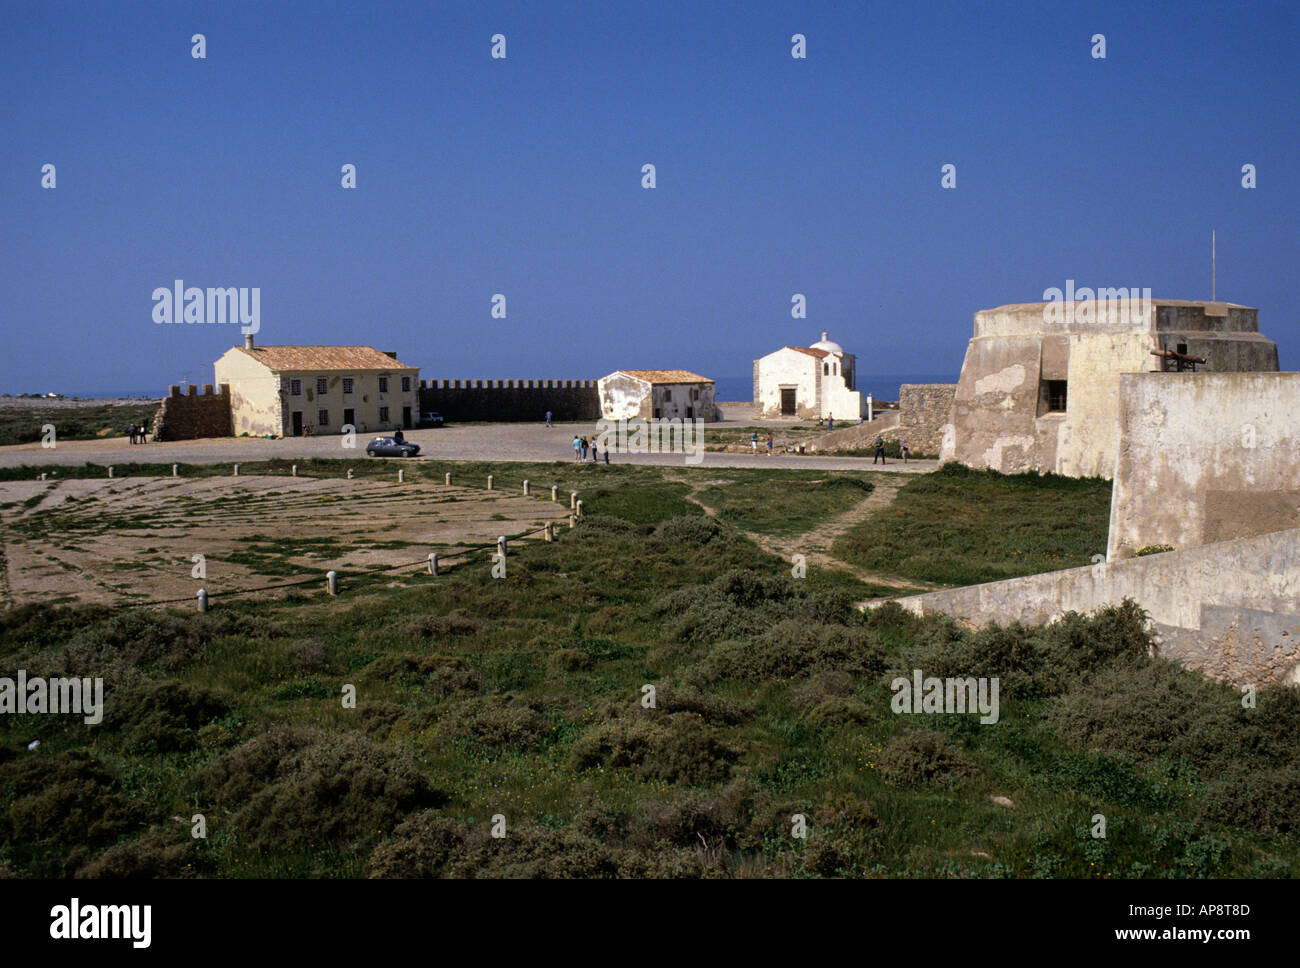 The fortress of Fortaleza de Sagres with part of the Rosa dos Ventos wind or rose compass Algarve Portugal Europe Stock Photo